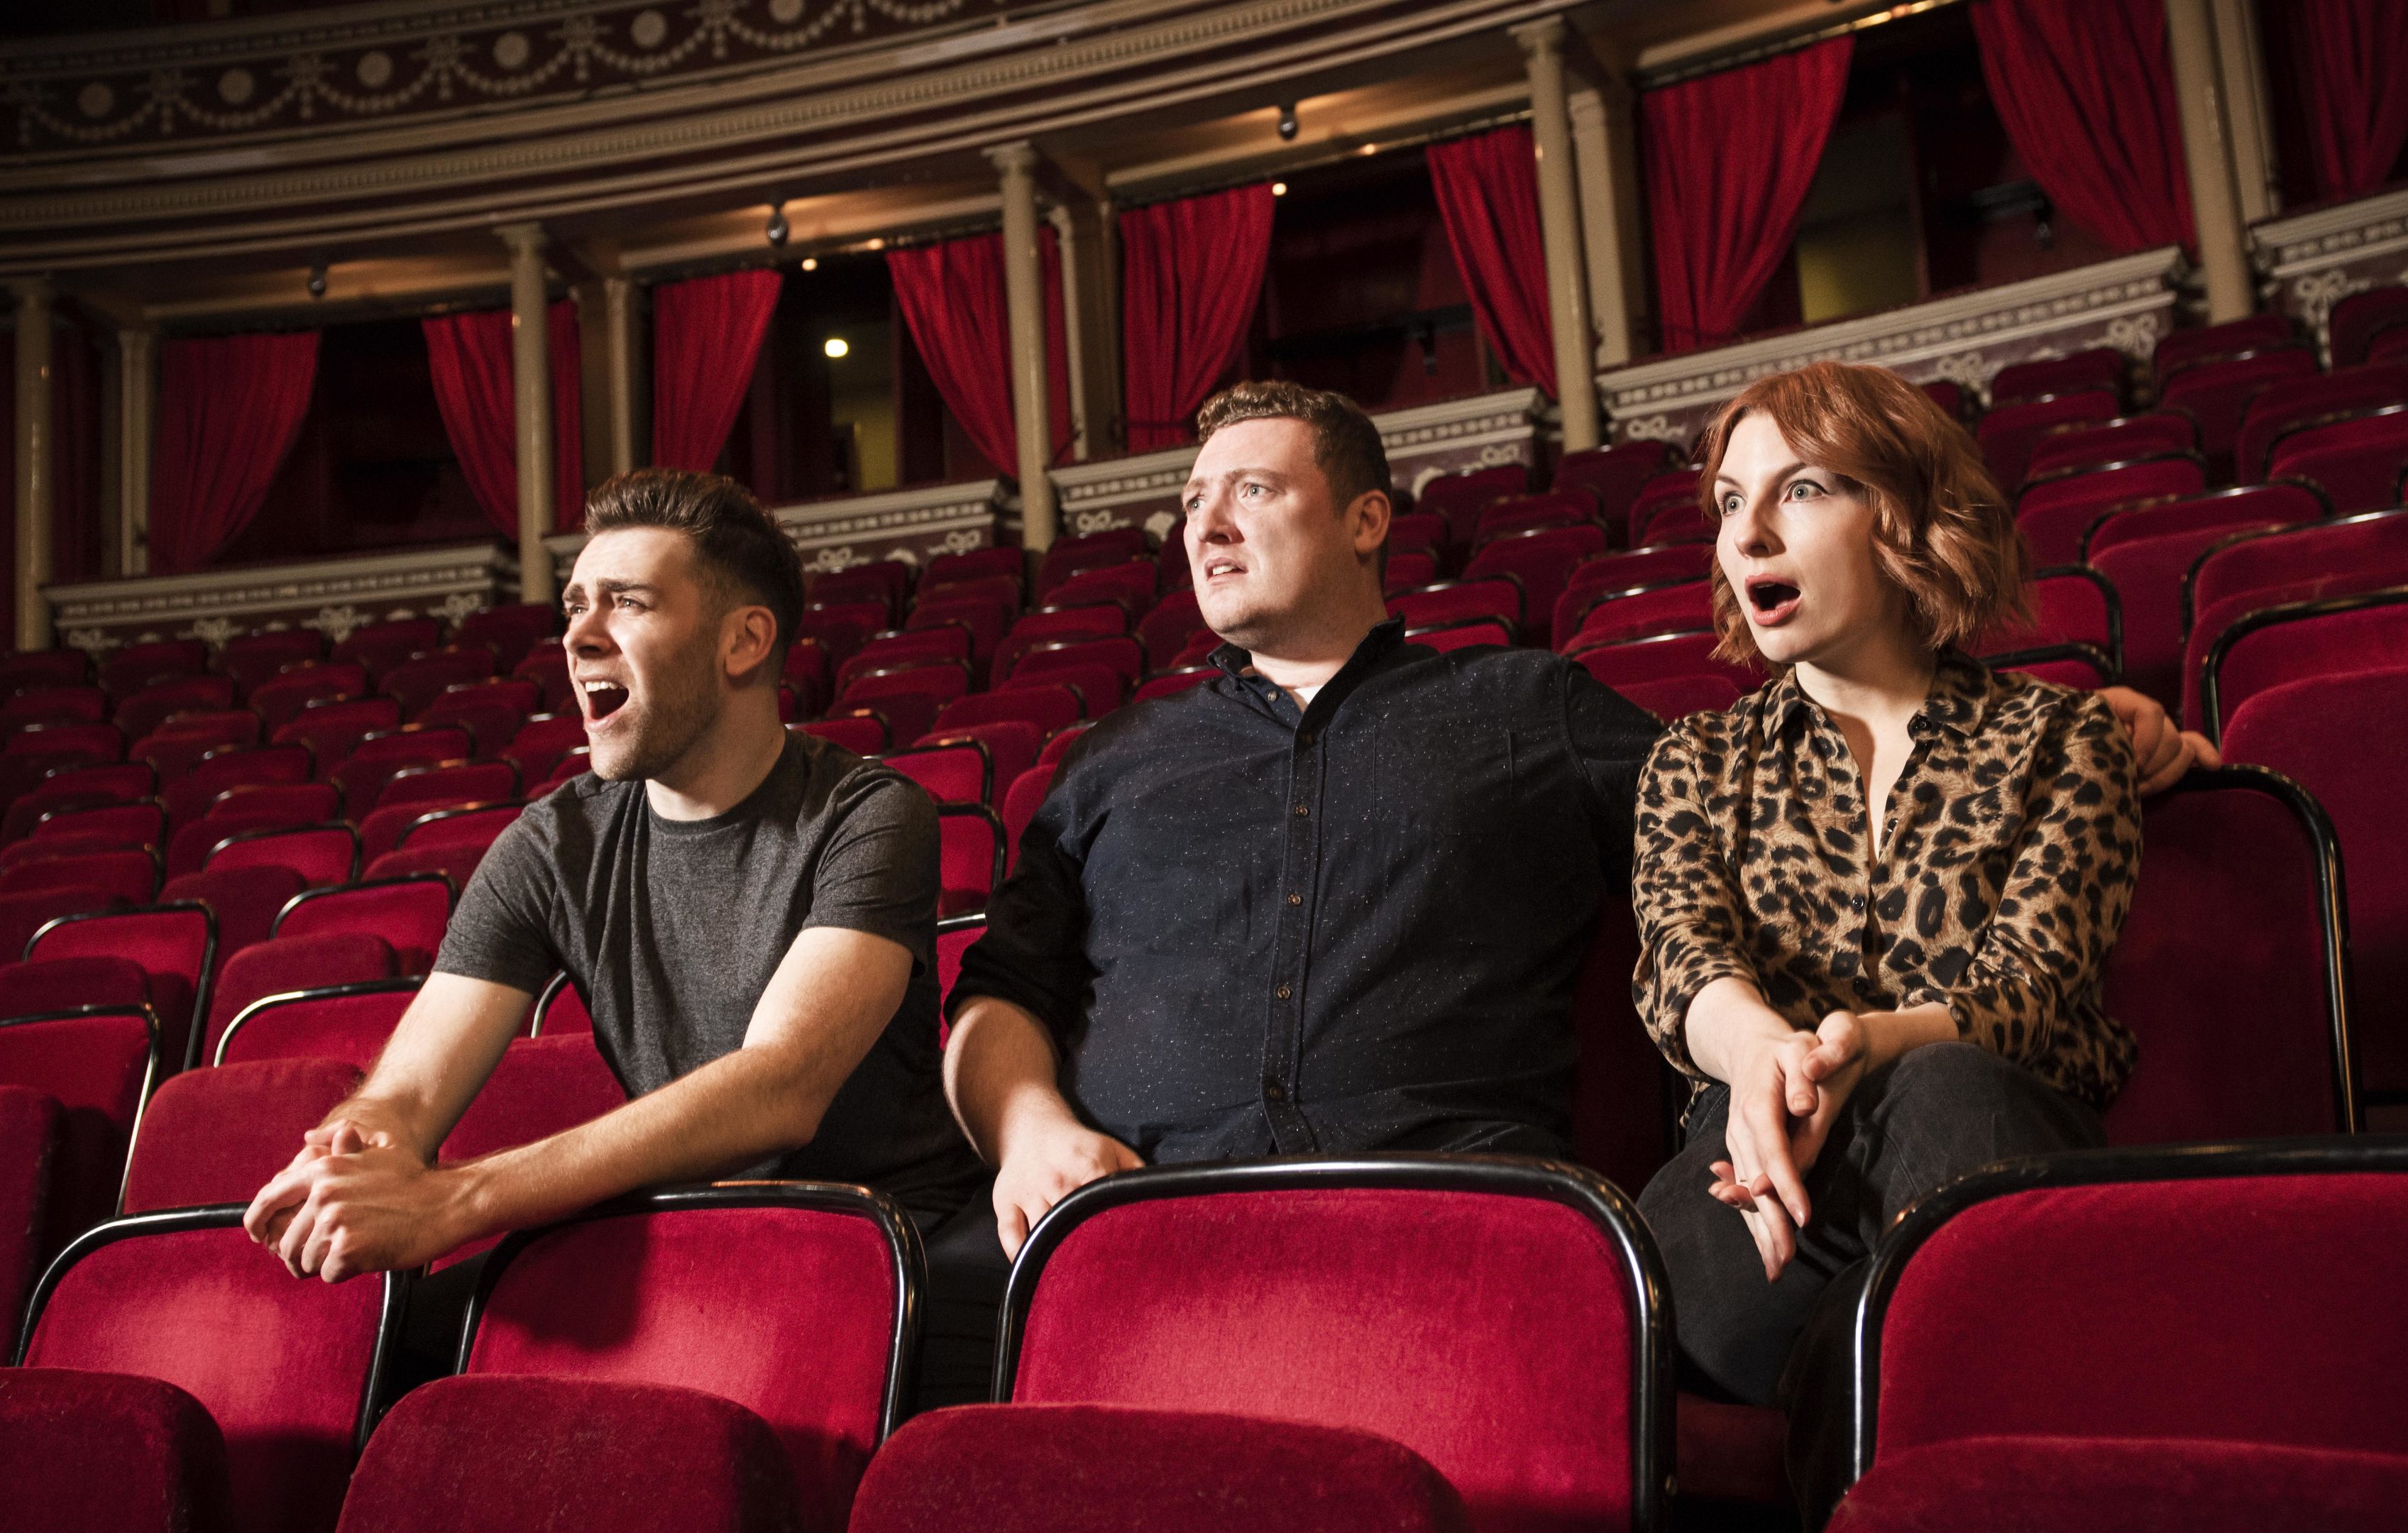 Jamie Morton (centre) and podcast co-hosts James Cooper and Alice Levine (Royal Albert Hall)